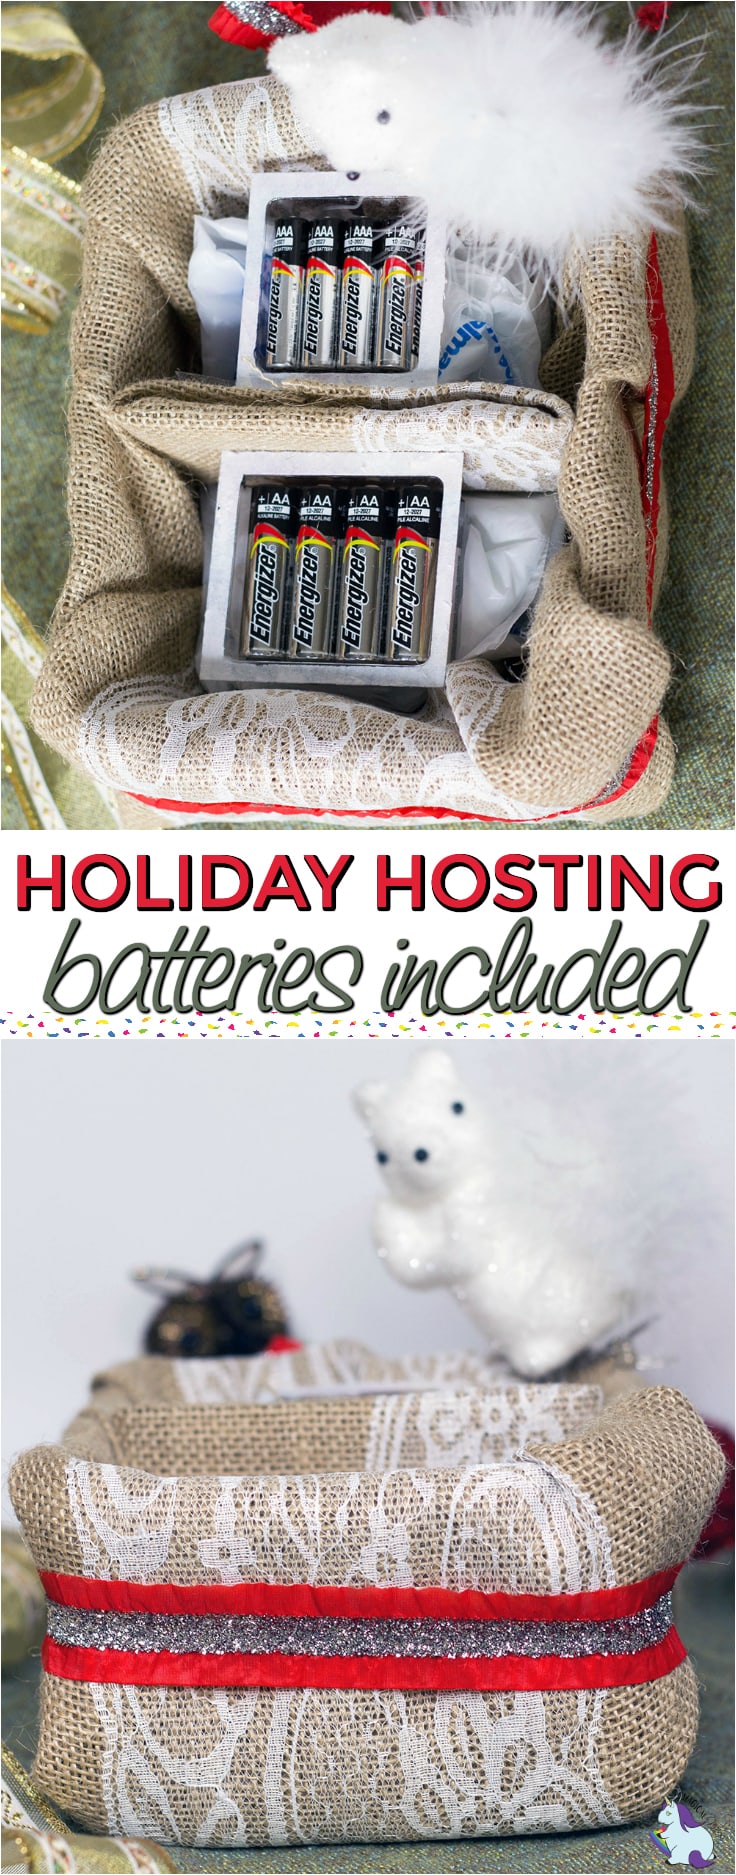 Batteries in a holiday decorated basket. 